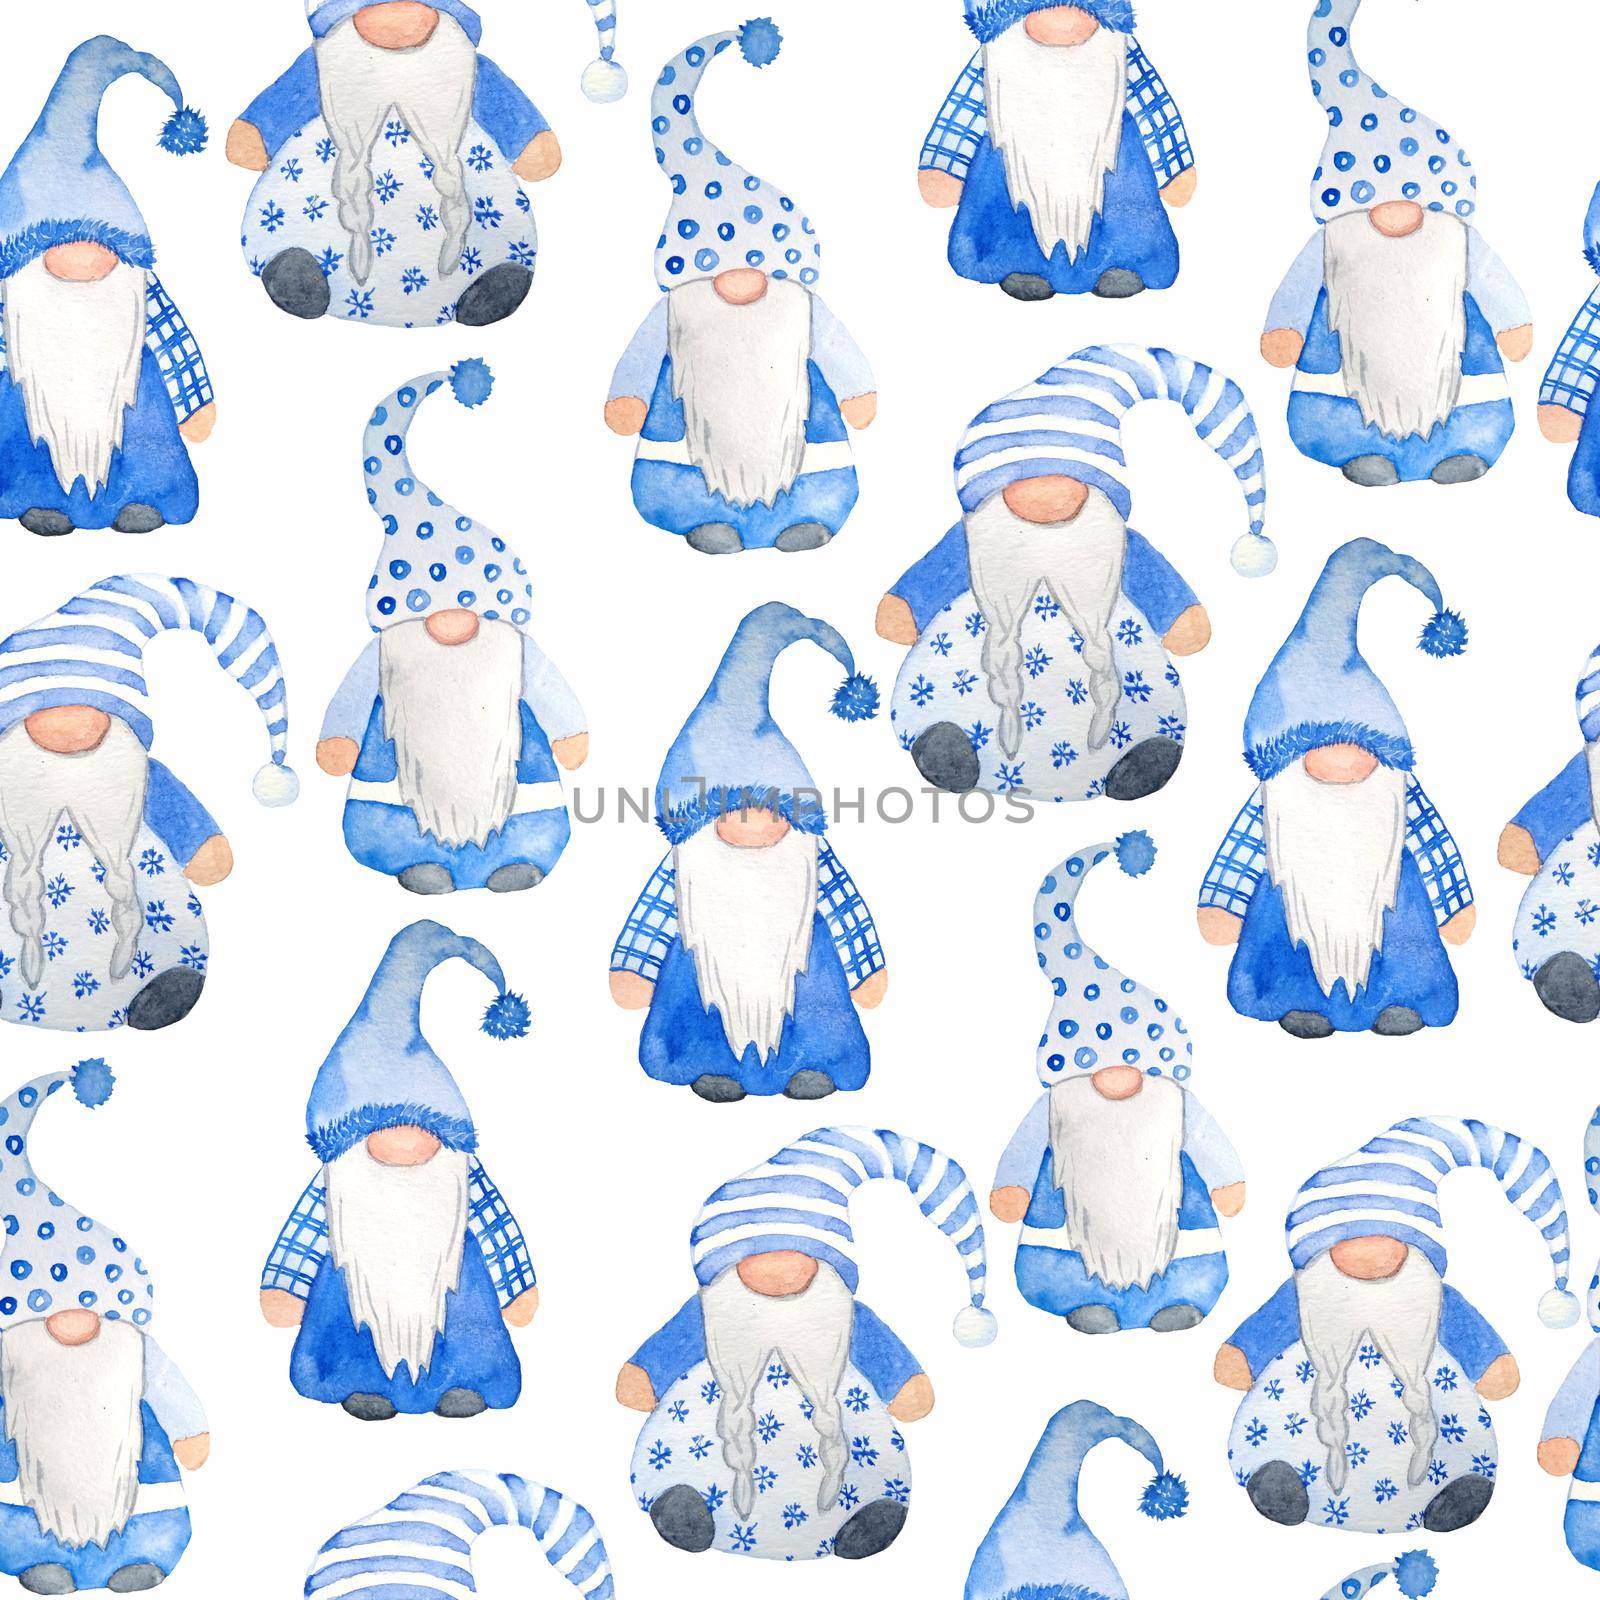 Watercolor hand drawn seamless pattern nordic scandinavian gnomes for christmas decor tree. New year illustration in blue grey cartoon style. Funny winter character north swedish elf in hat beard. Greeting card. by Lagmar